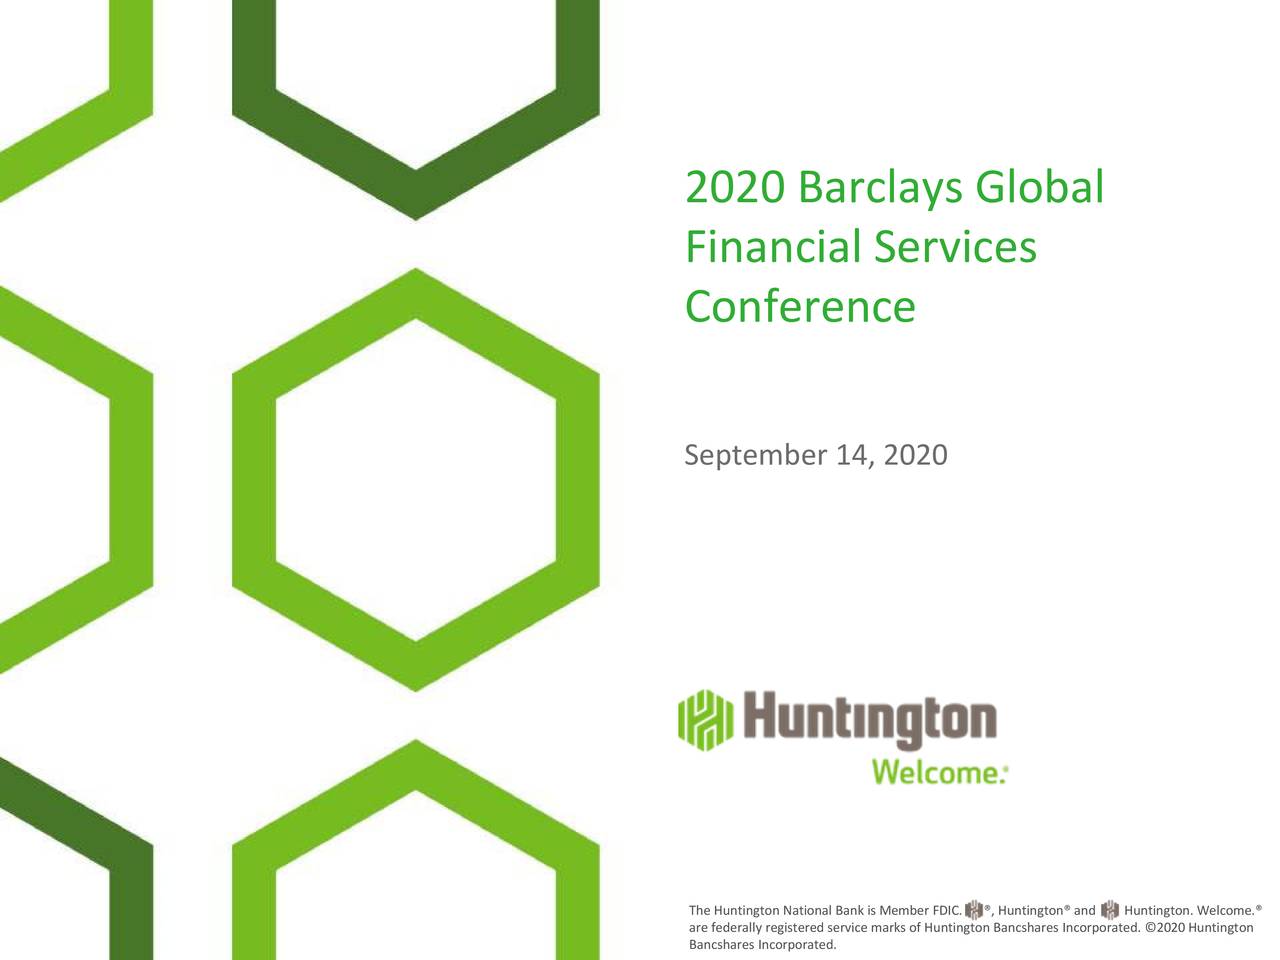 Huntington Bancshares Presents At 2020 Barclays Global Financial Services Conference